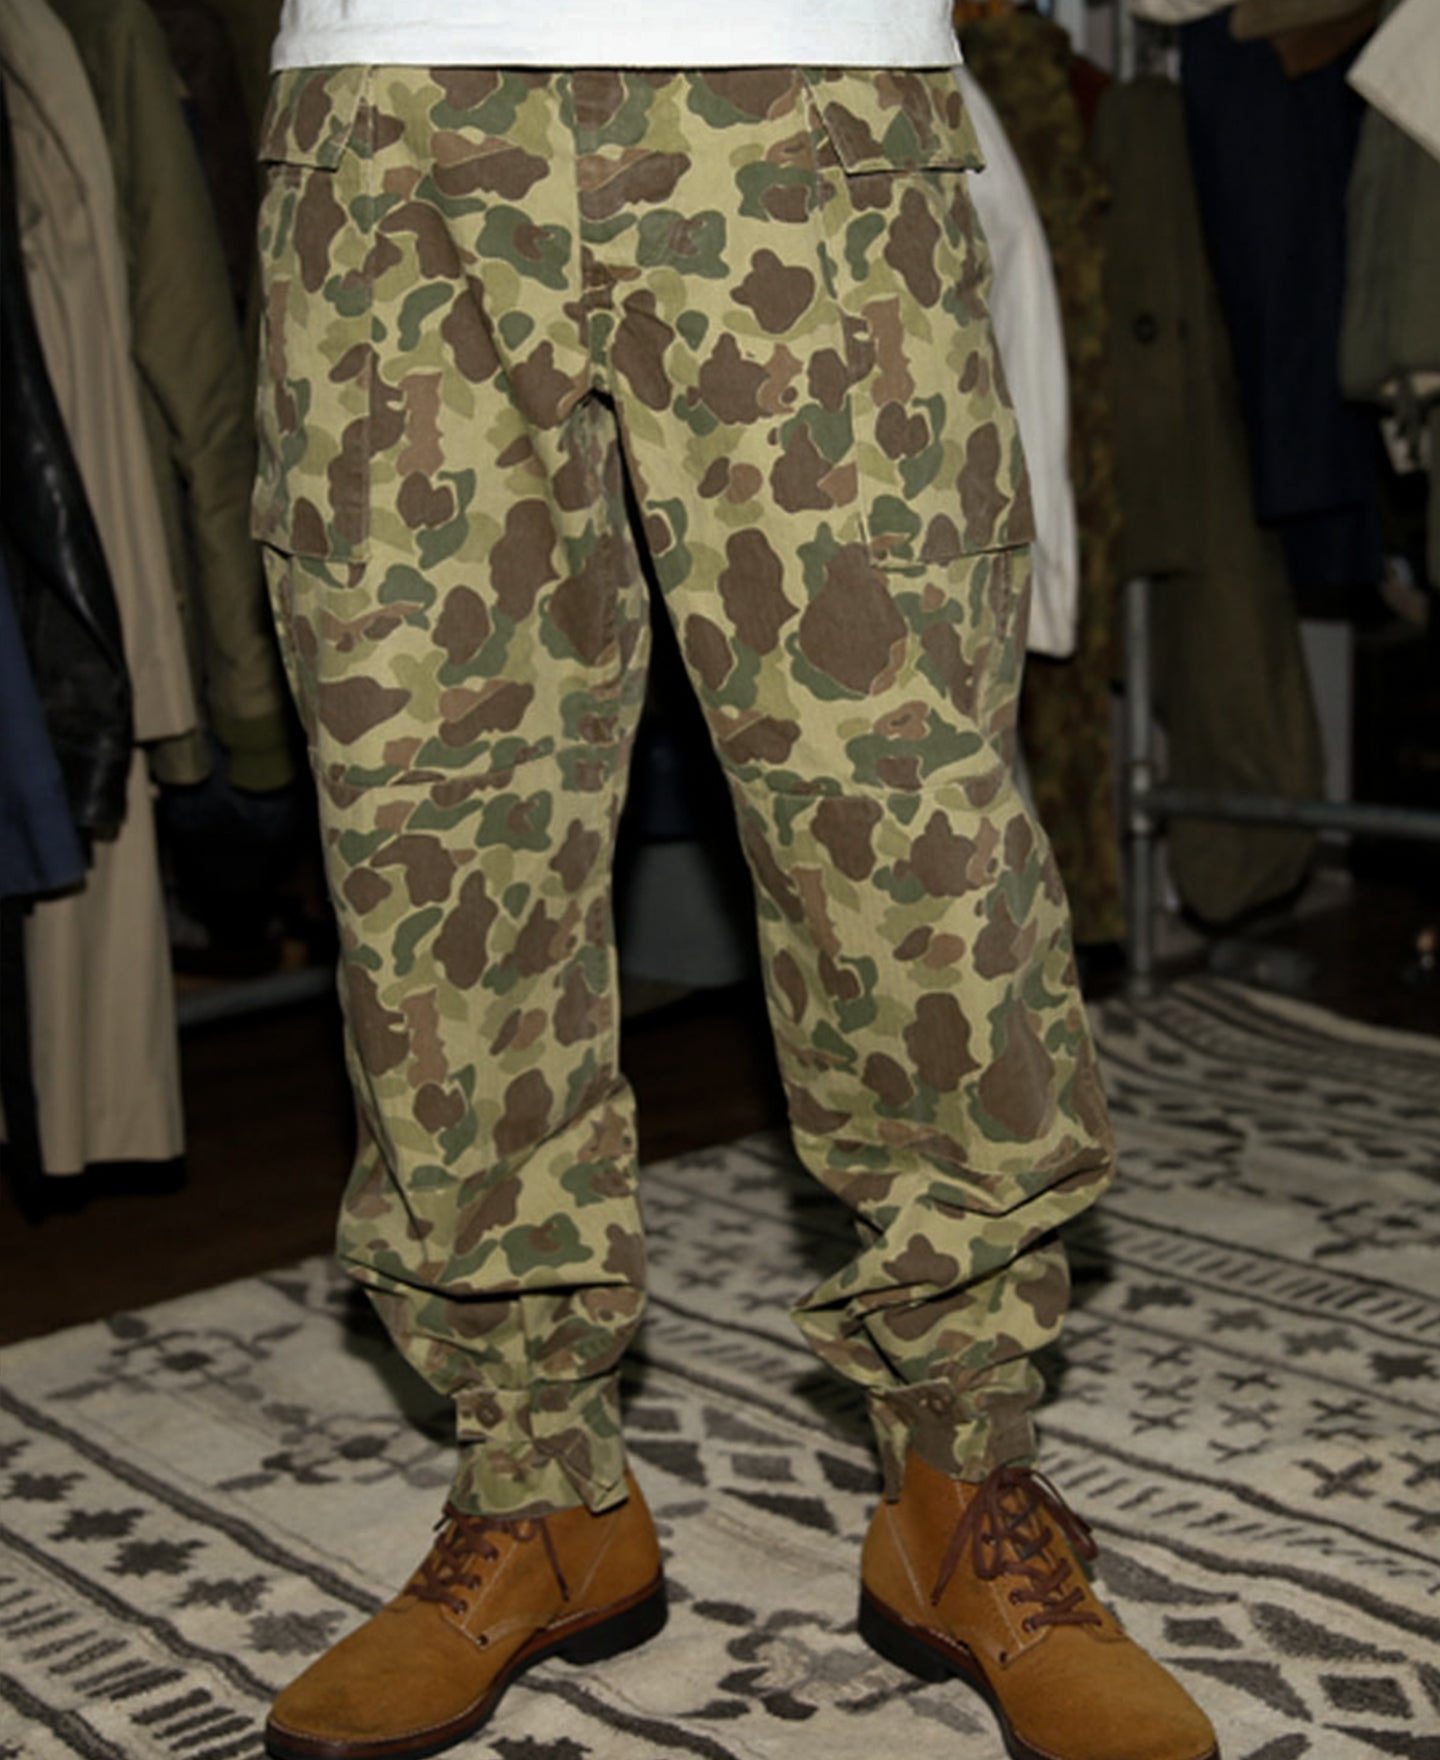 Cotton Printed Mens Army Cargo Jogger Pants